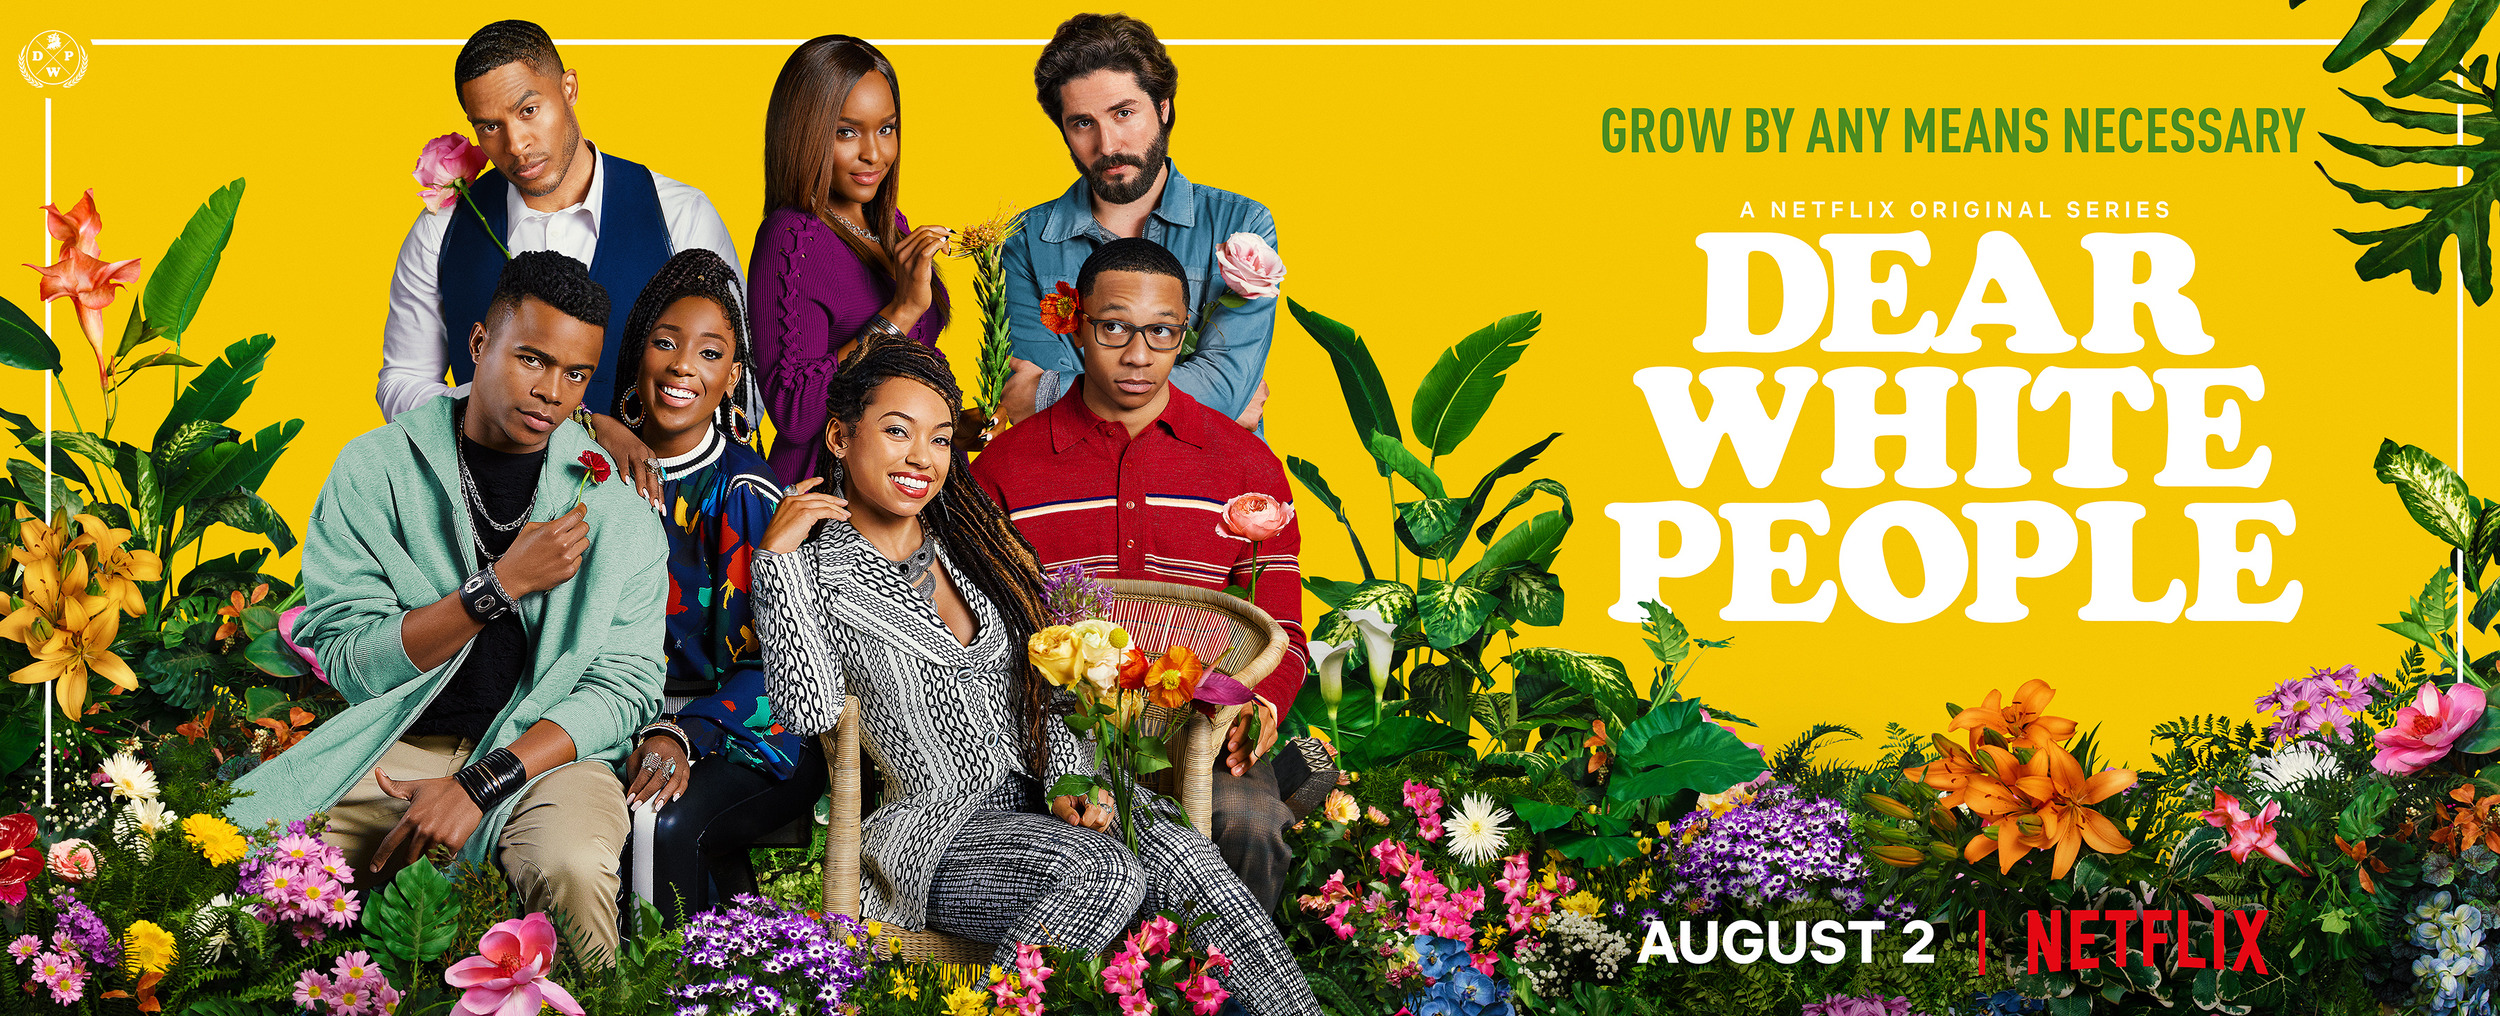 Mega Sized TV Poster Image for Dear White People (#9 of 17)